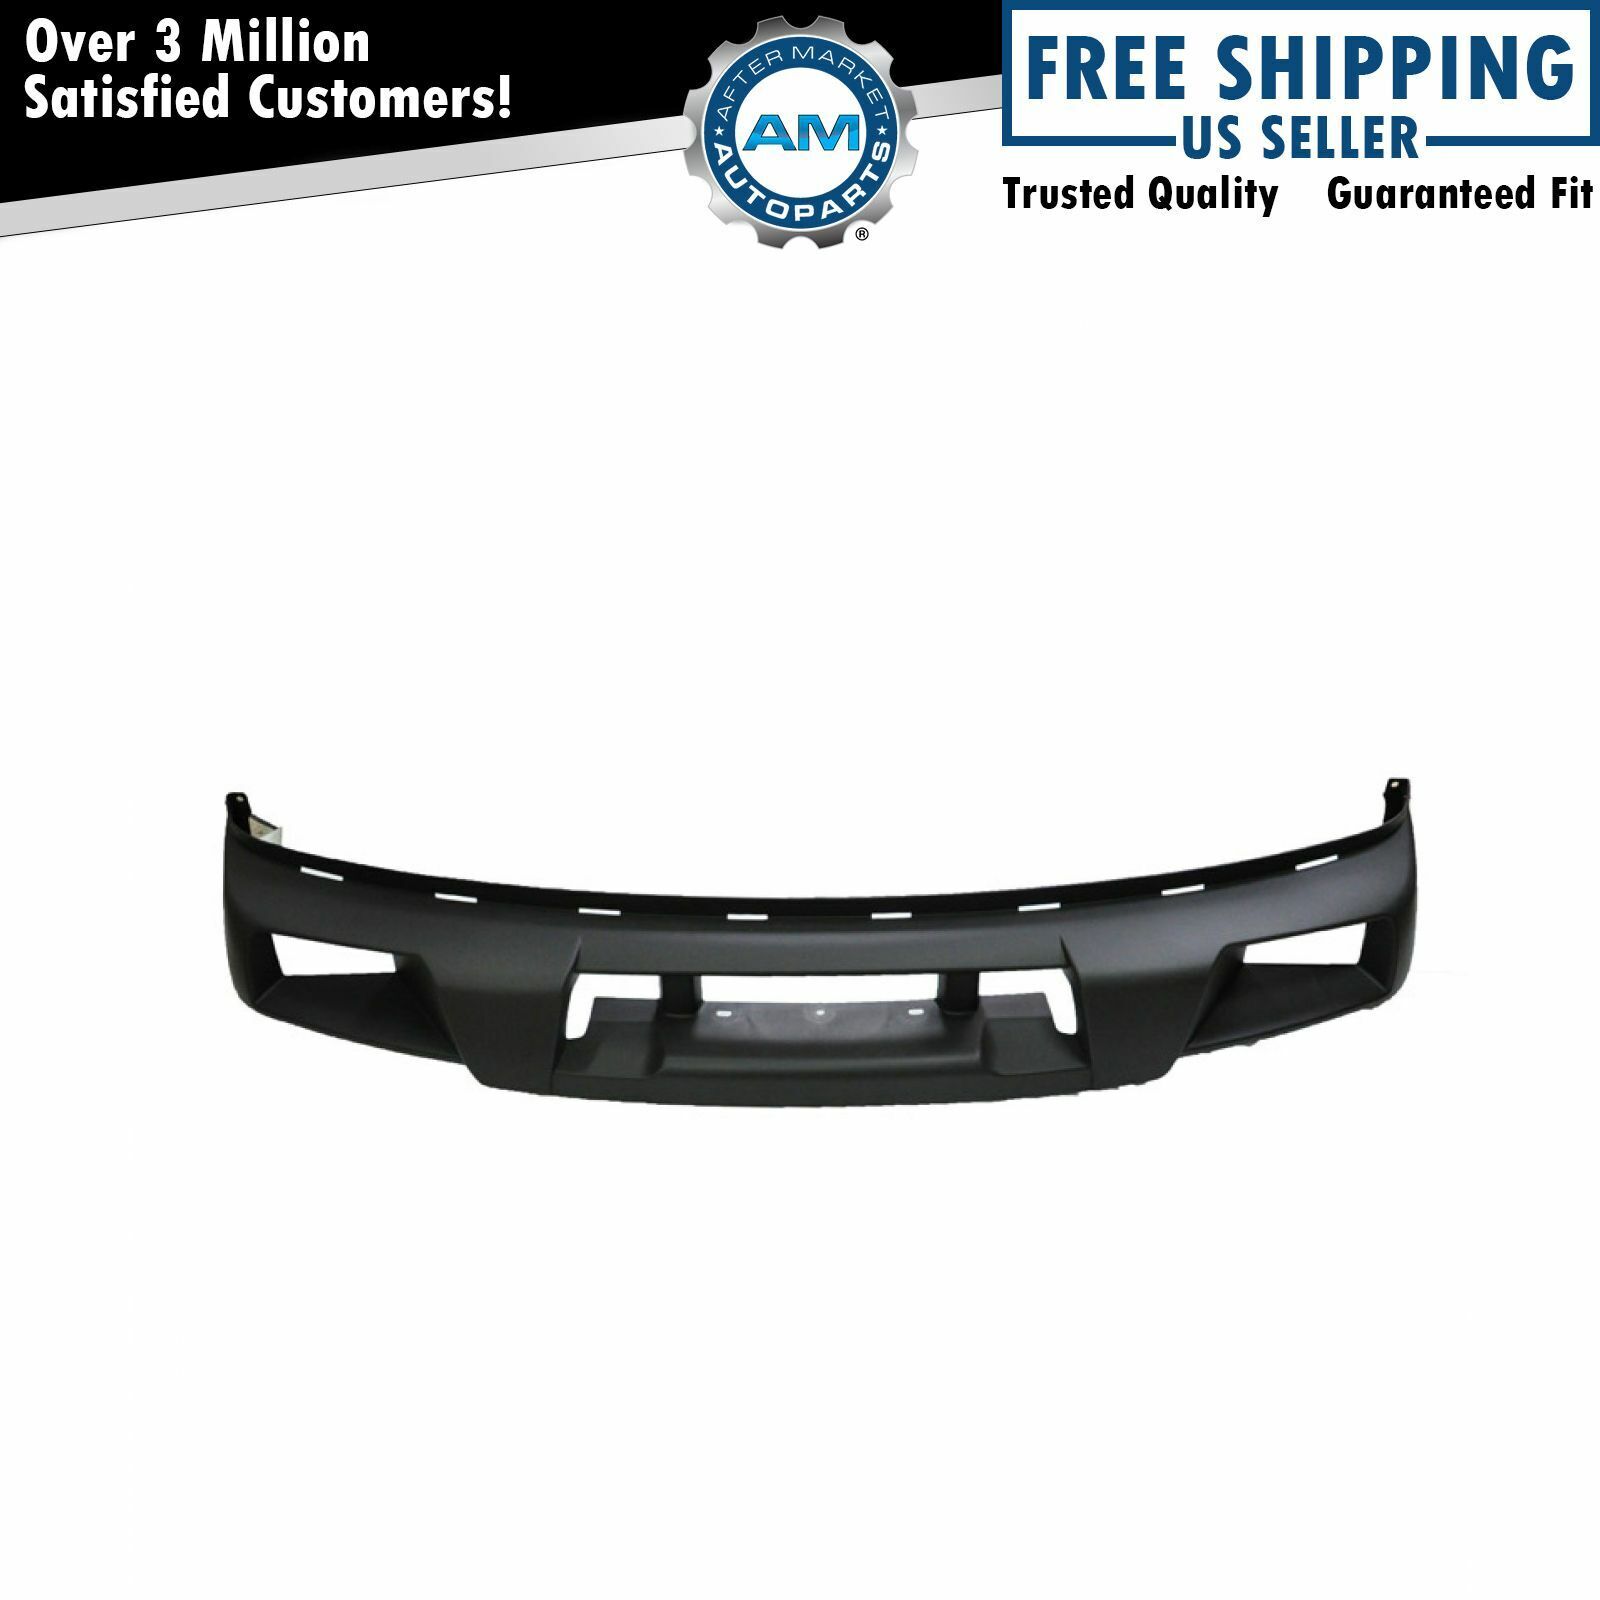 Front Bumper Cover for Chevy Colorado GMC Canyon Pickup Truck w/ Fog Lights